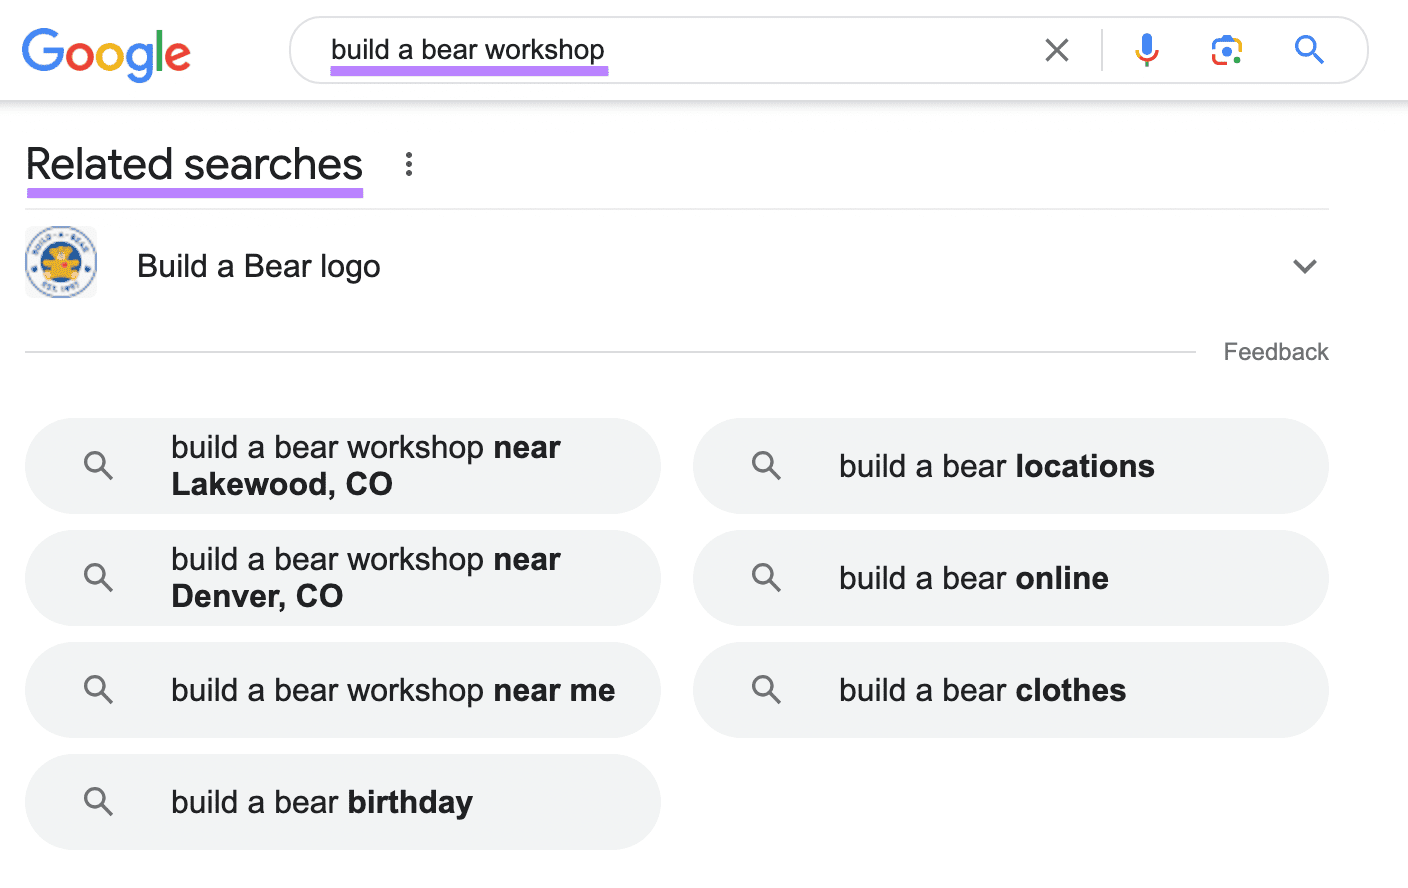 Google's ‘Related searches’ section for "build a bear workshop" search